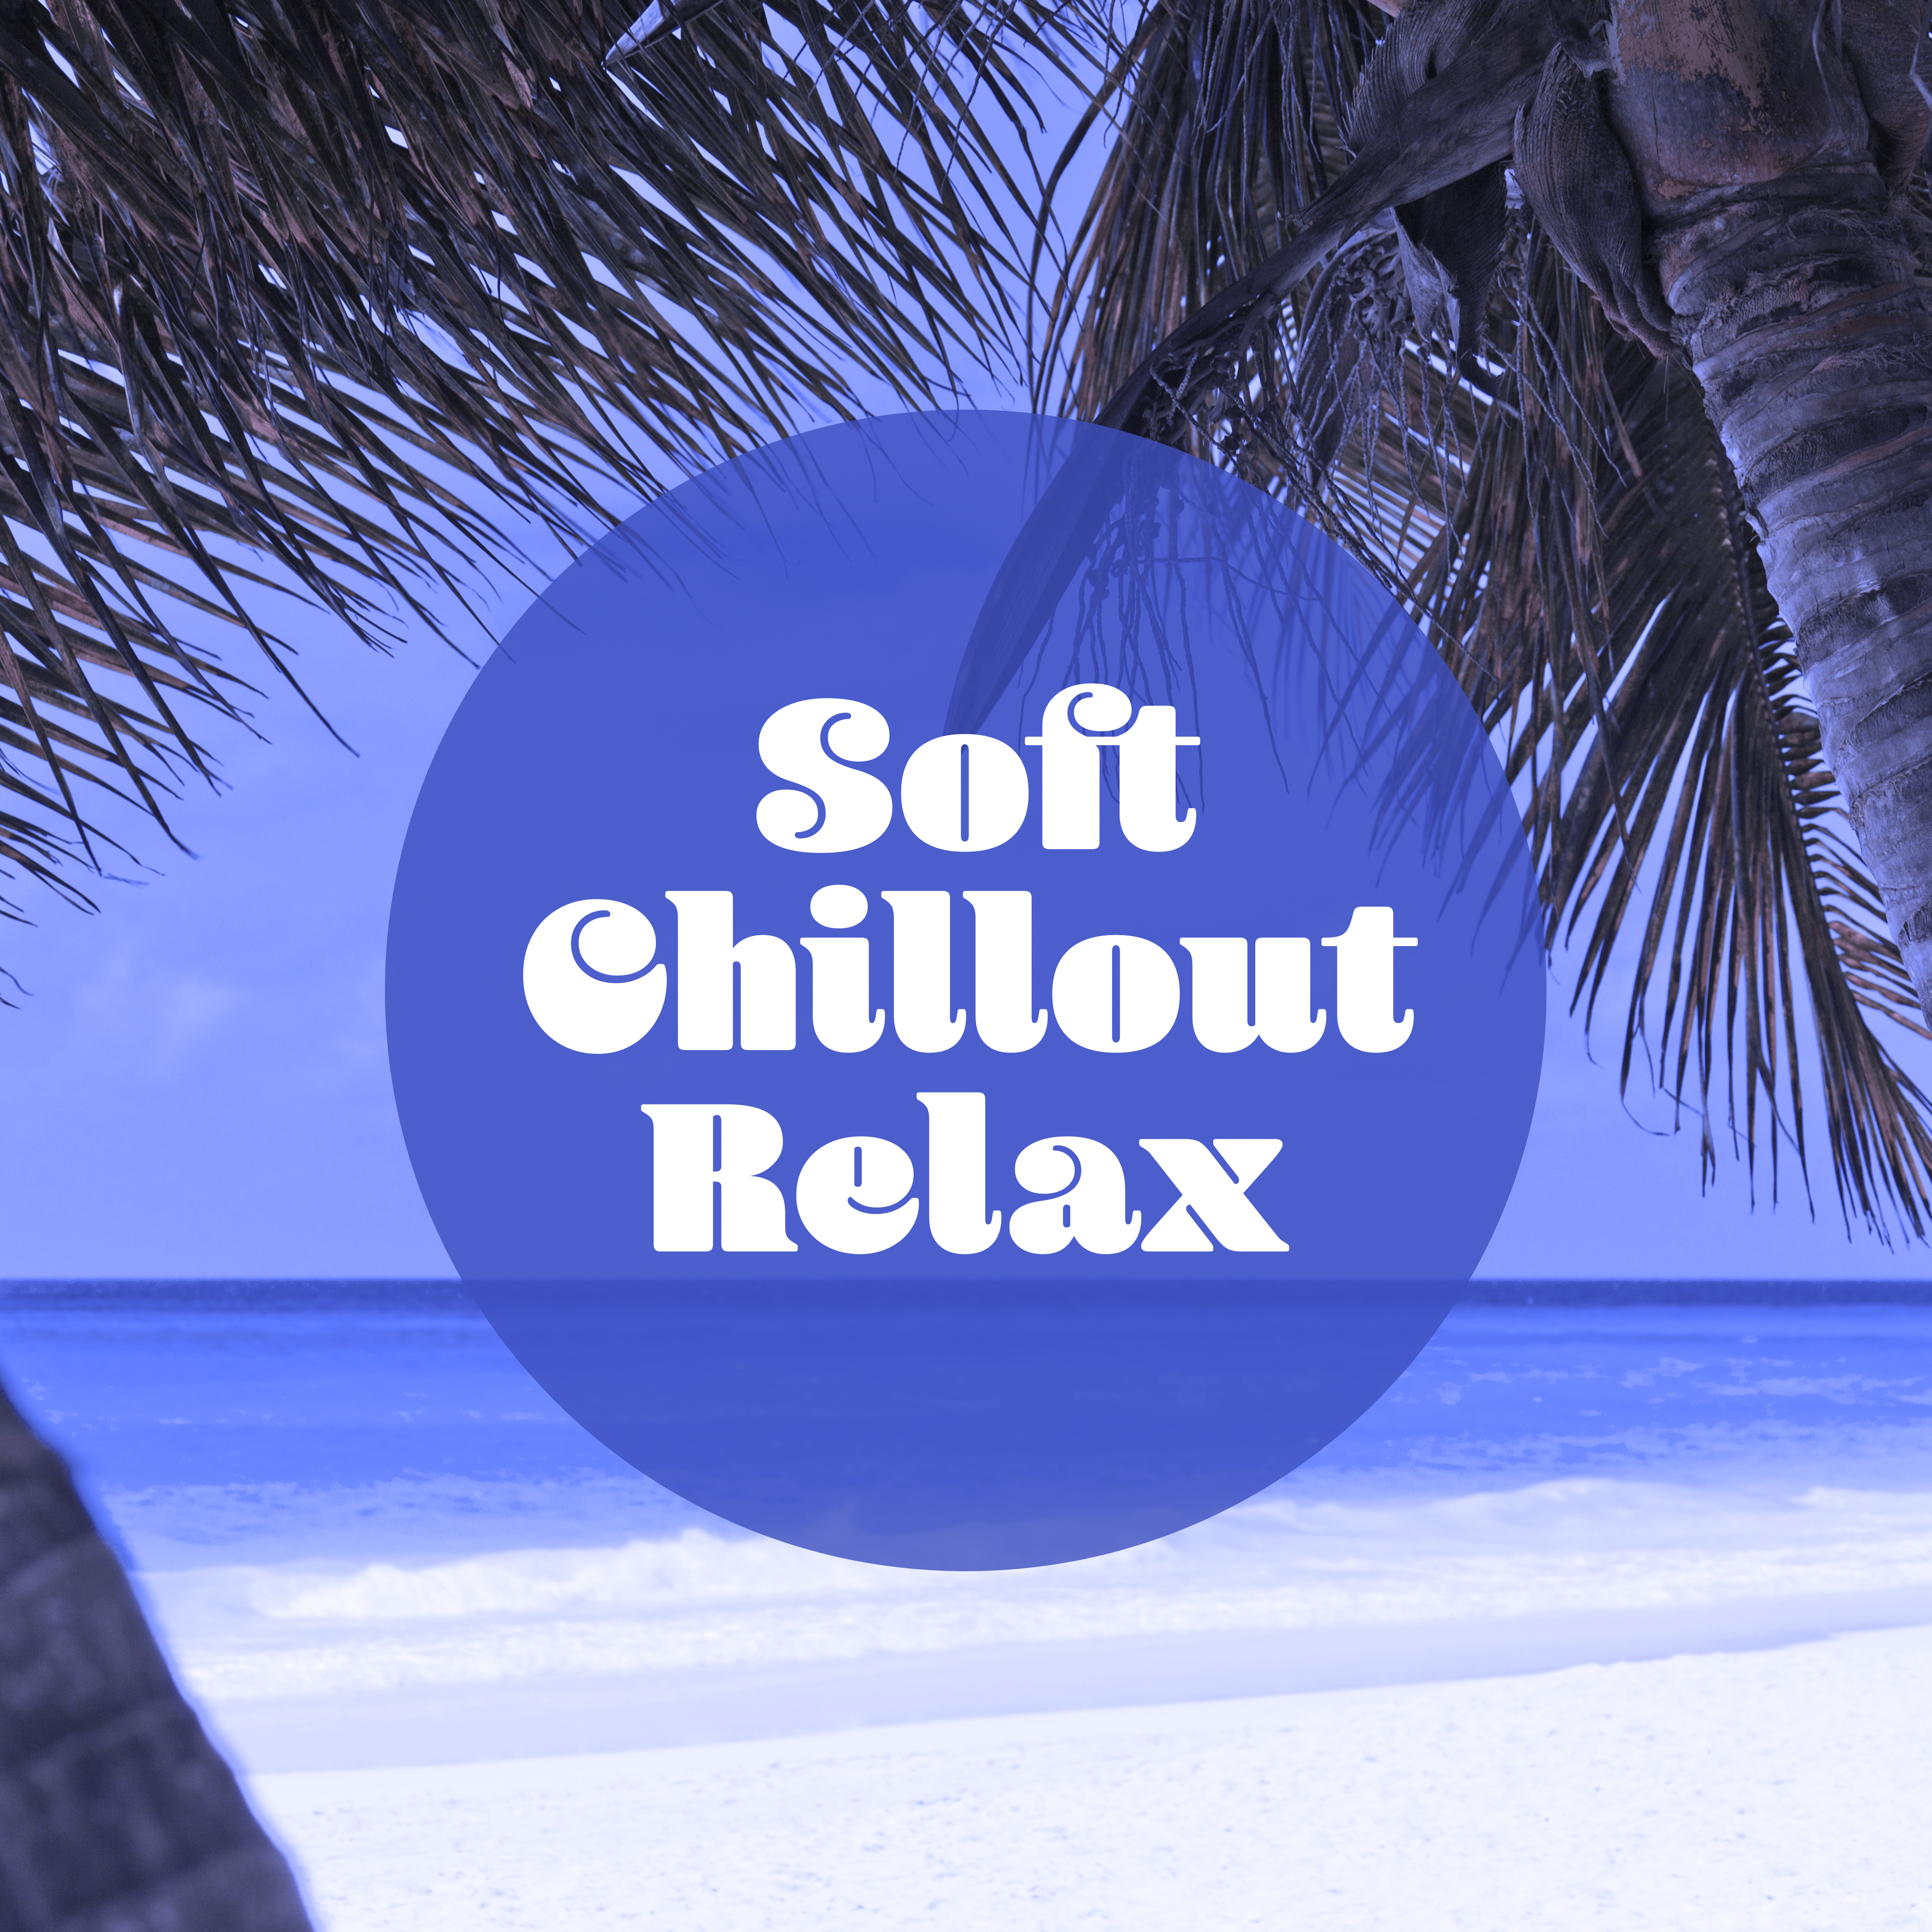 Soft Chillout Relax  Electronic Music, Ambient Sounds, Music for Party, Beach Music